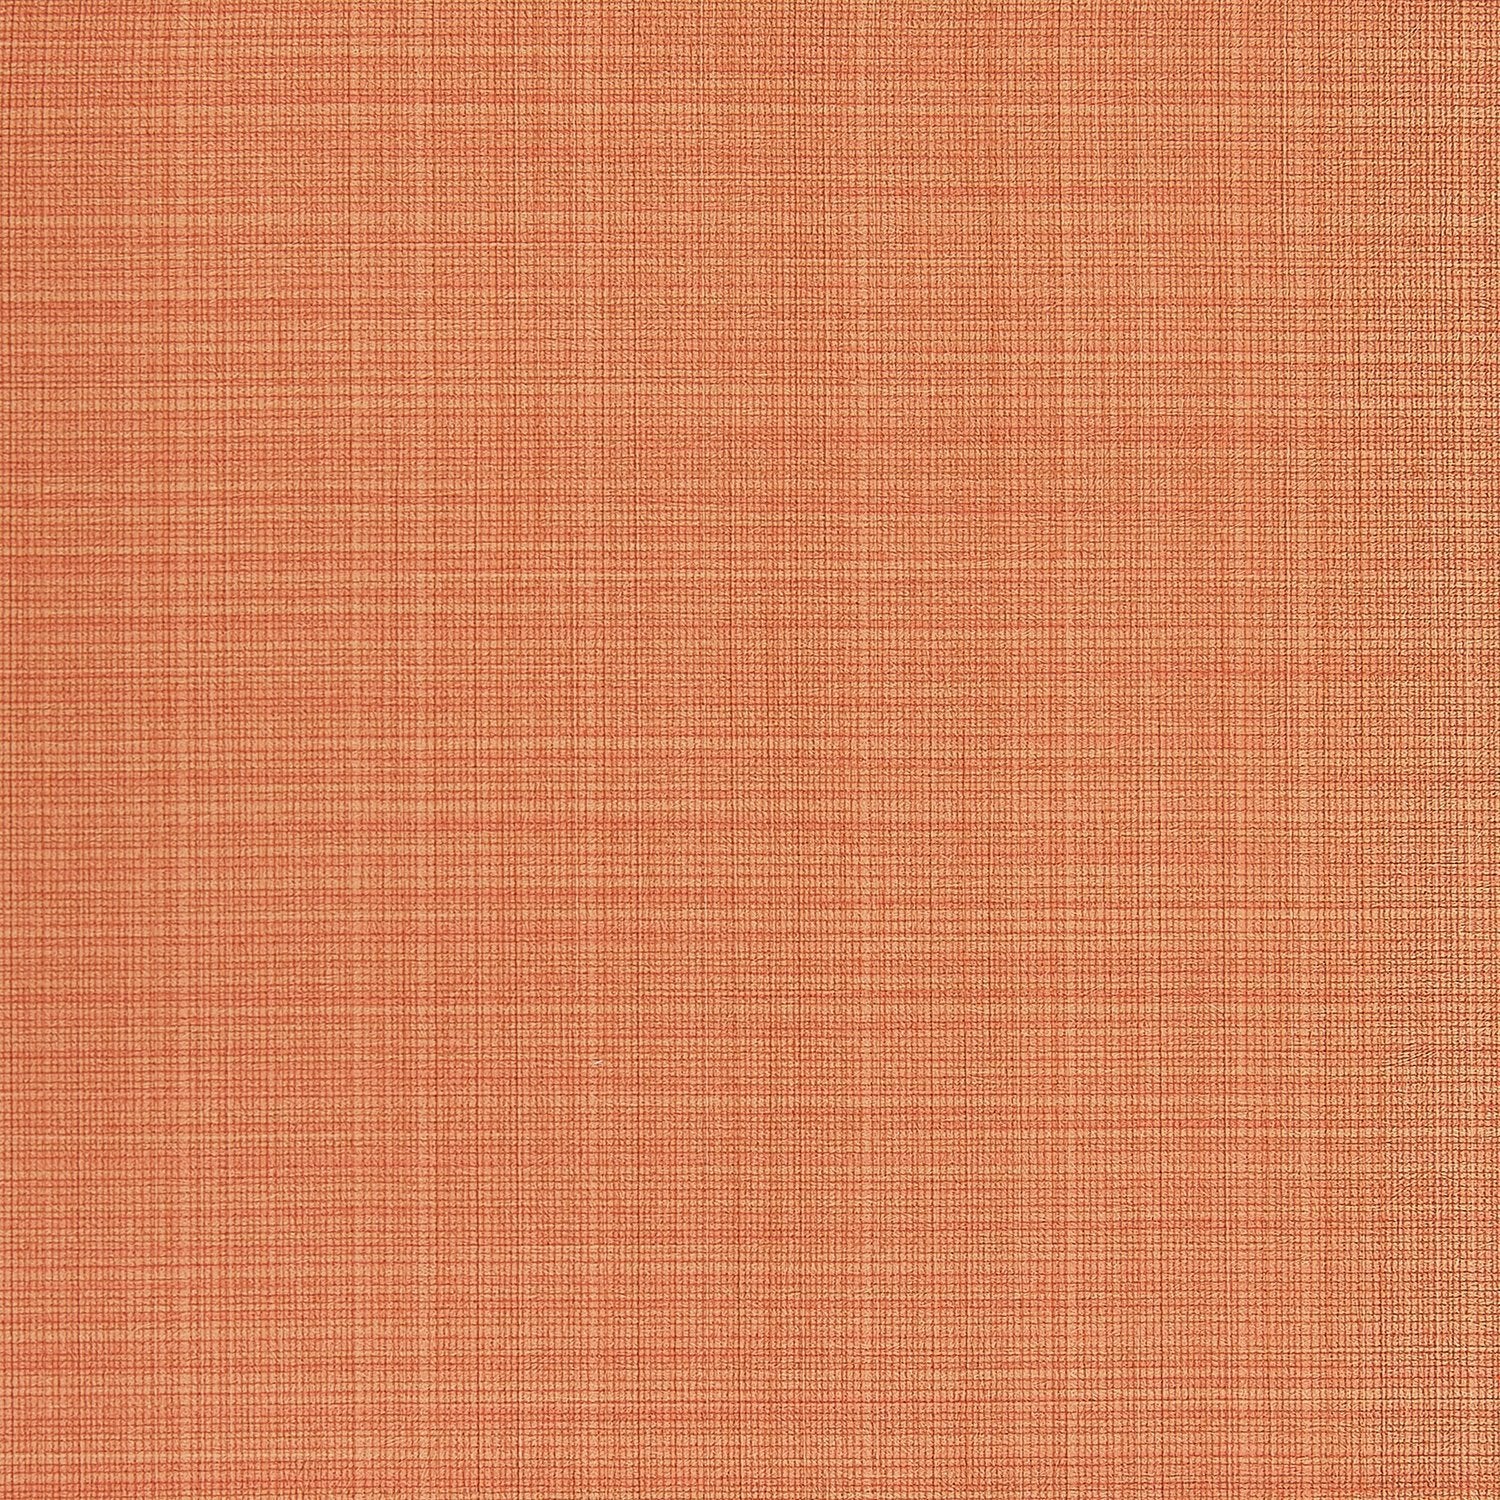 Angles Silk - Y47601 - Wallcovering - Vycon - Kube Contract